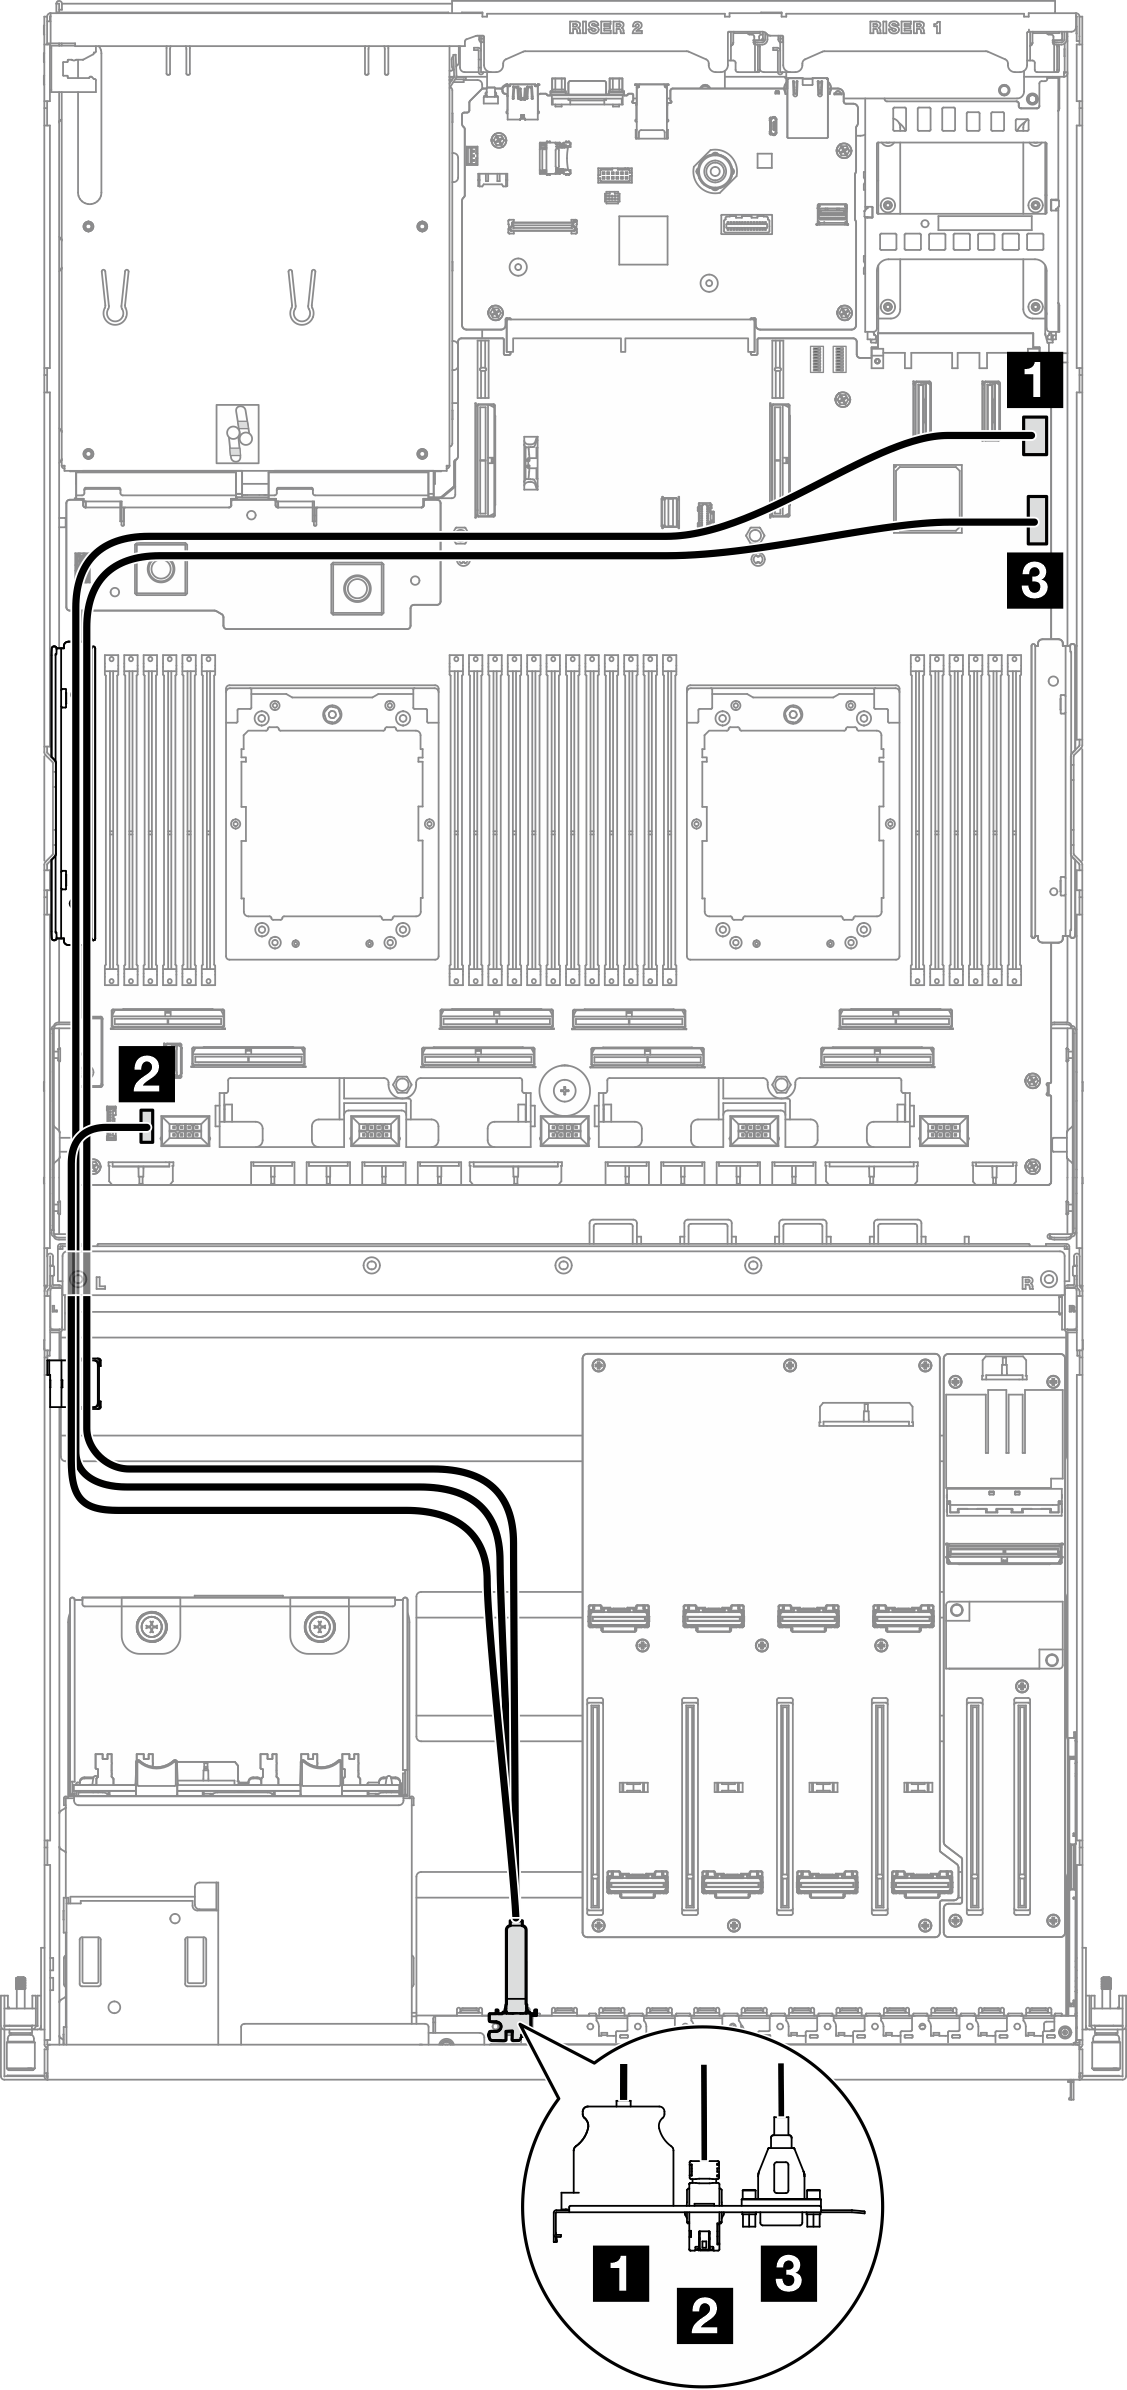 Cable routing for the front I/O module — 4-DW GPU Model